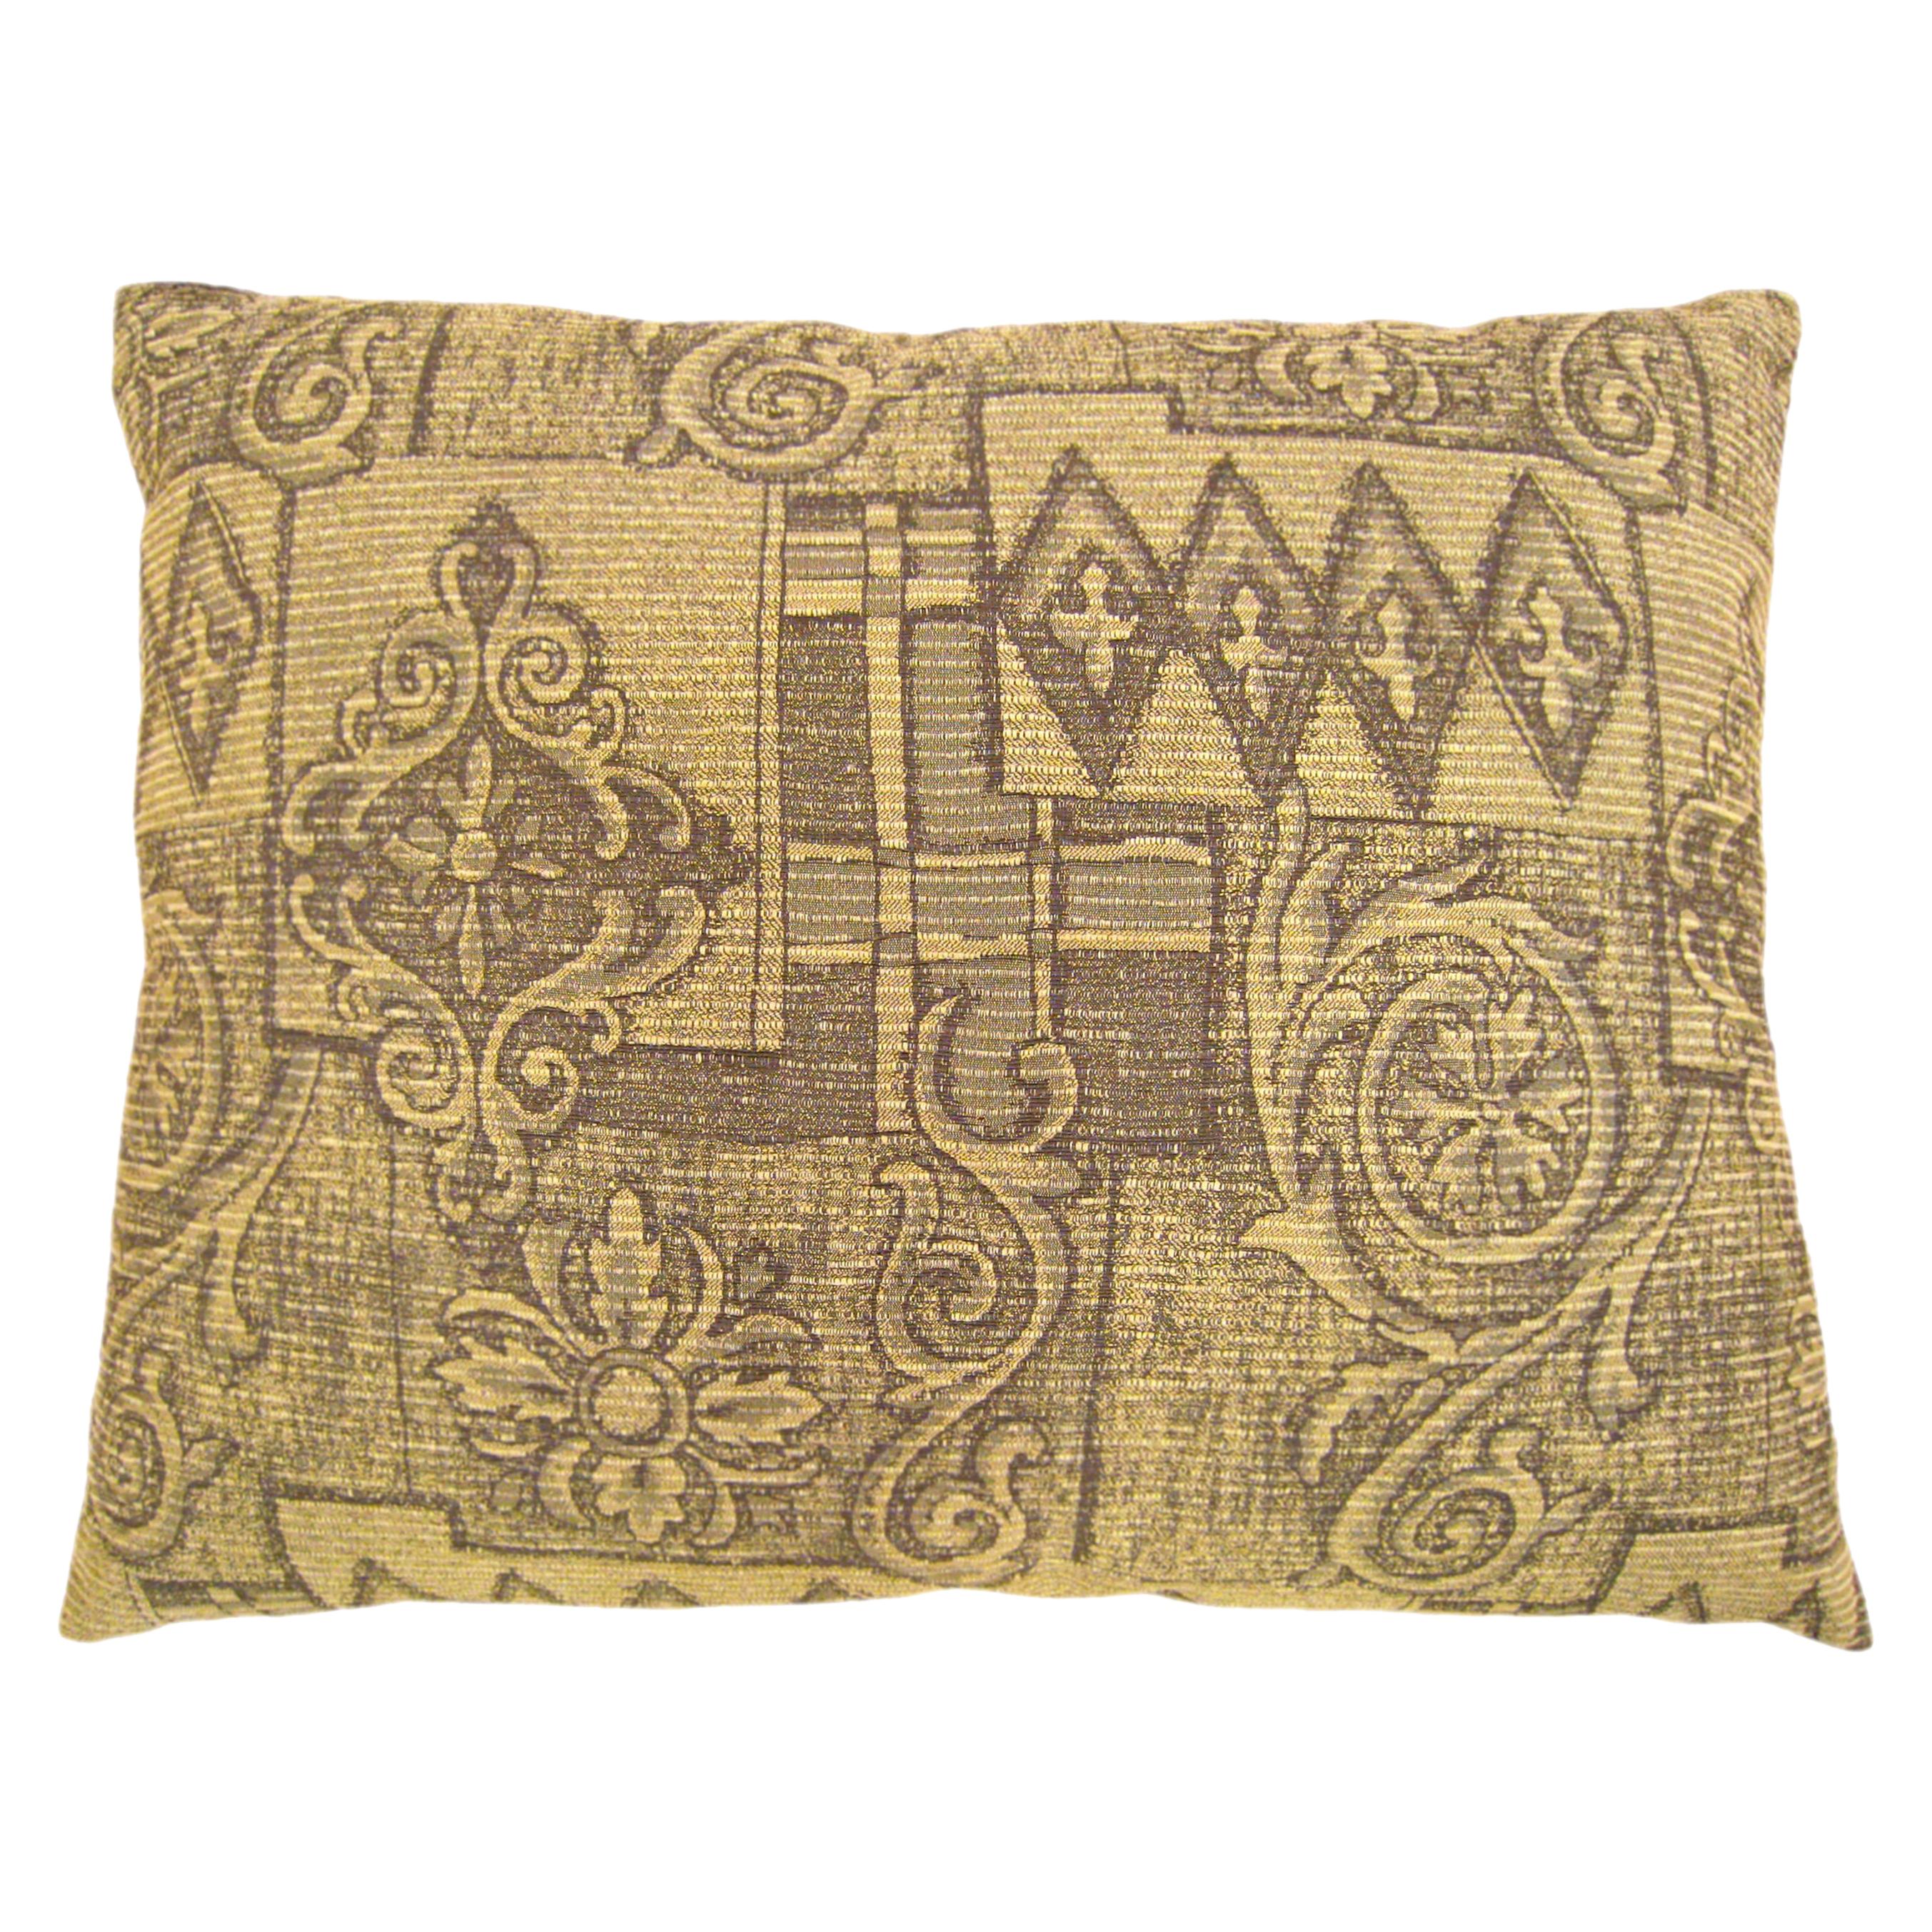 Vintage Decorative Pillow with a Directional Floral Pattern For Sale